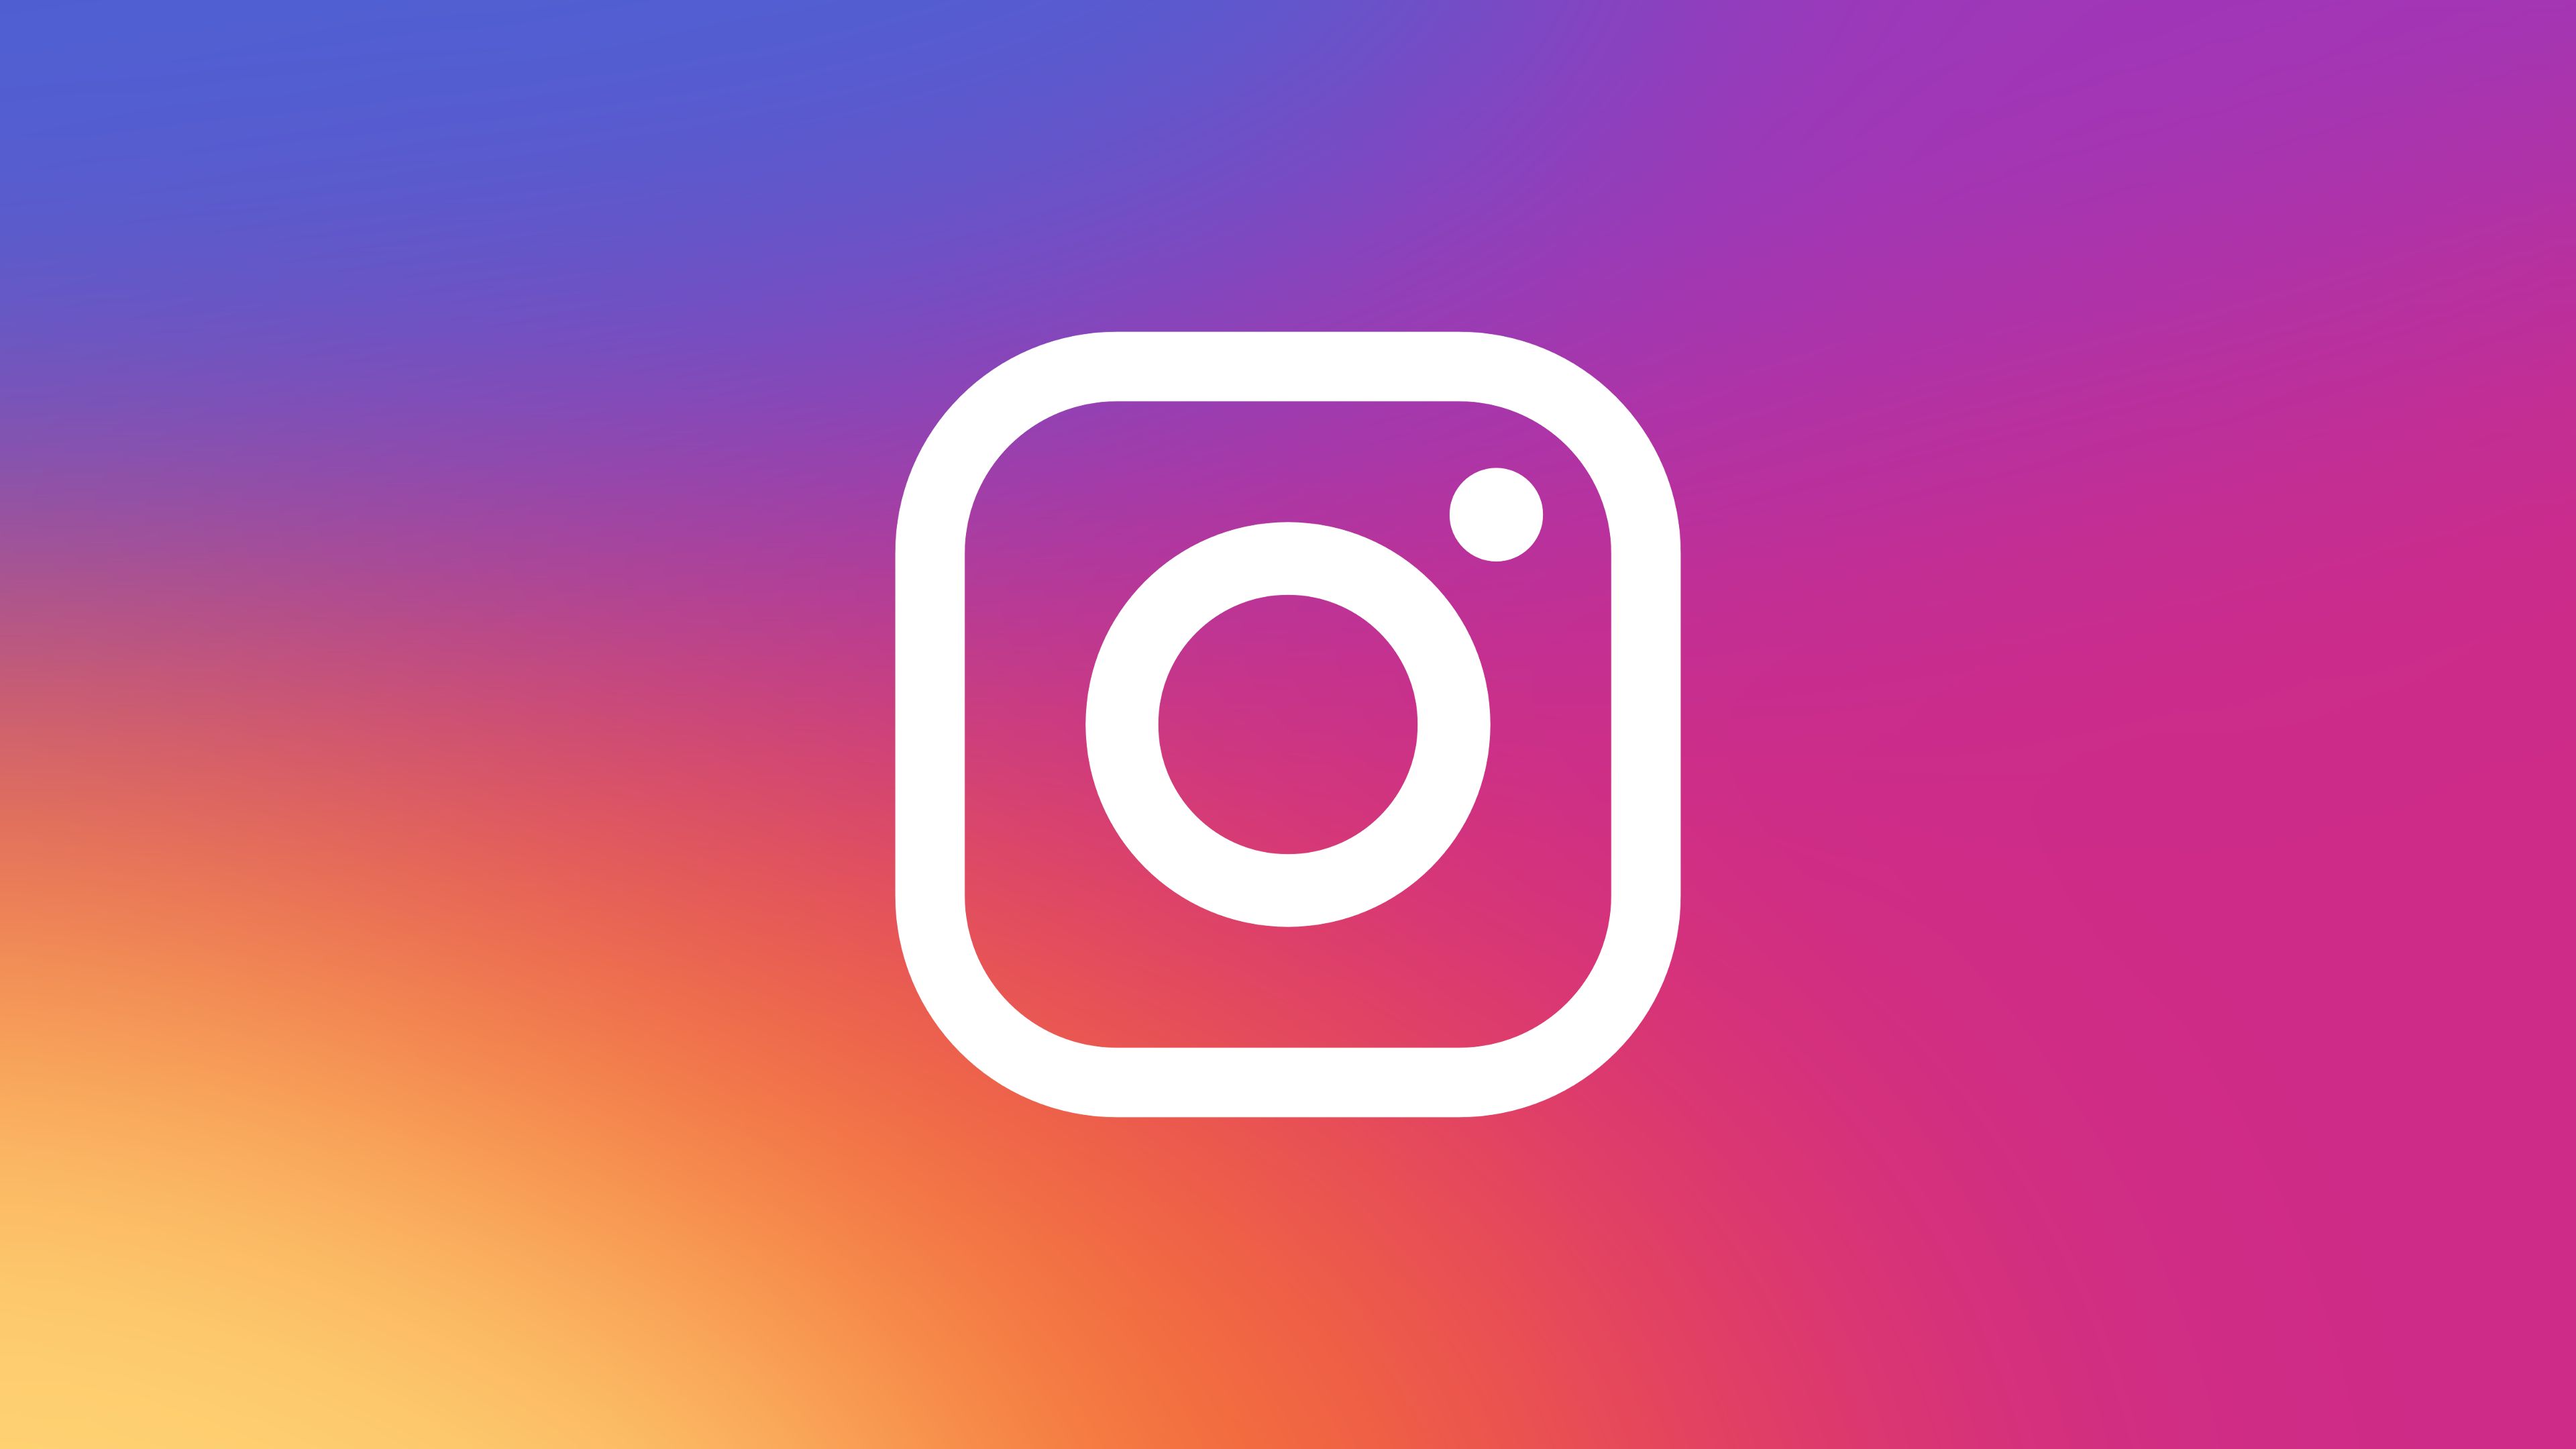 How to Earn $100 to $500 per day money from Instagram. Buy instagram accounts, Instagram wallpaper, Instagram logo